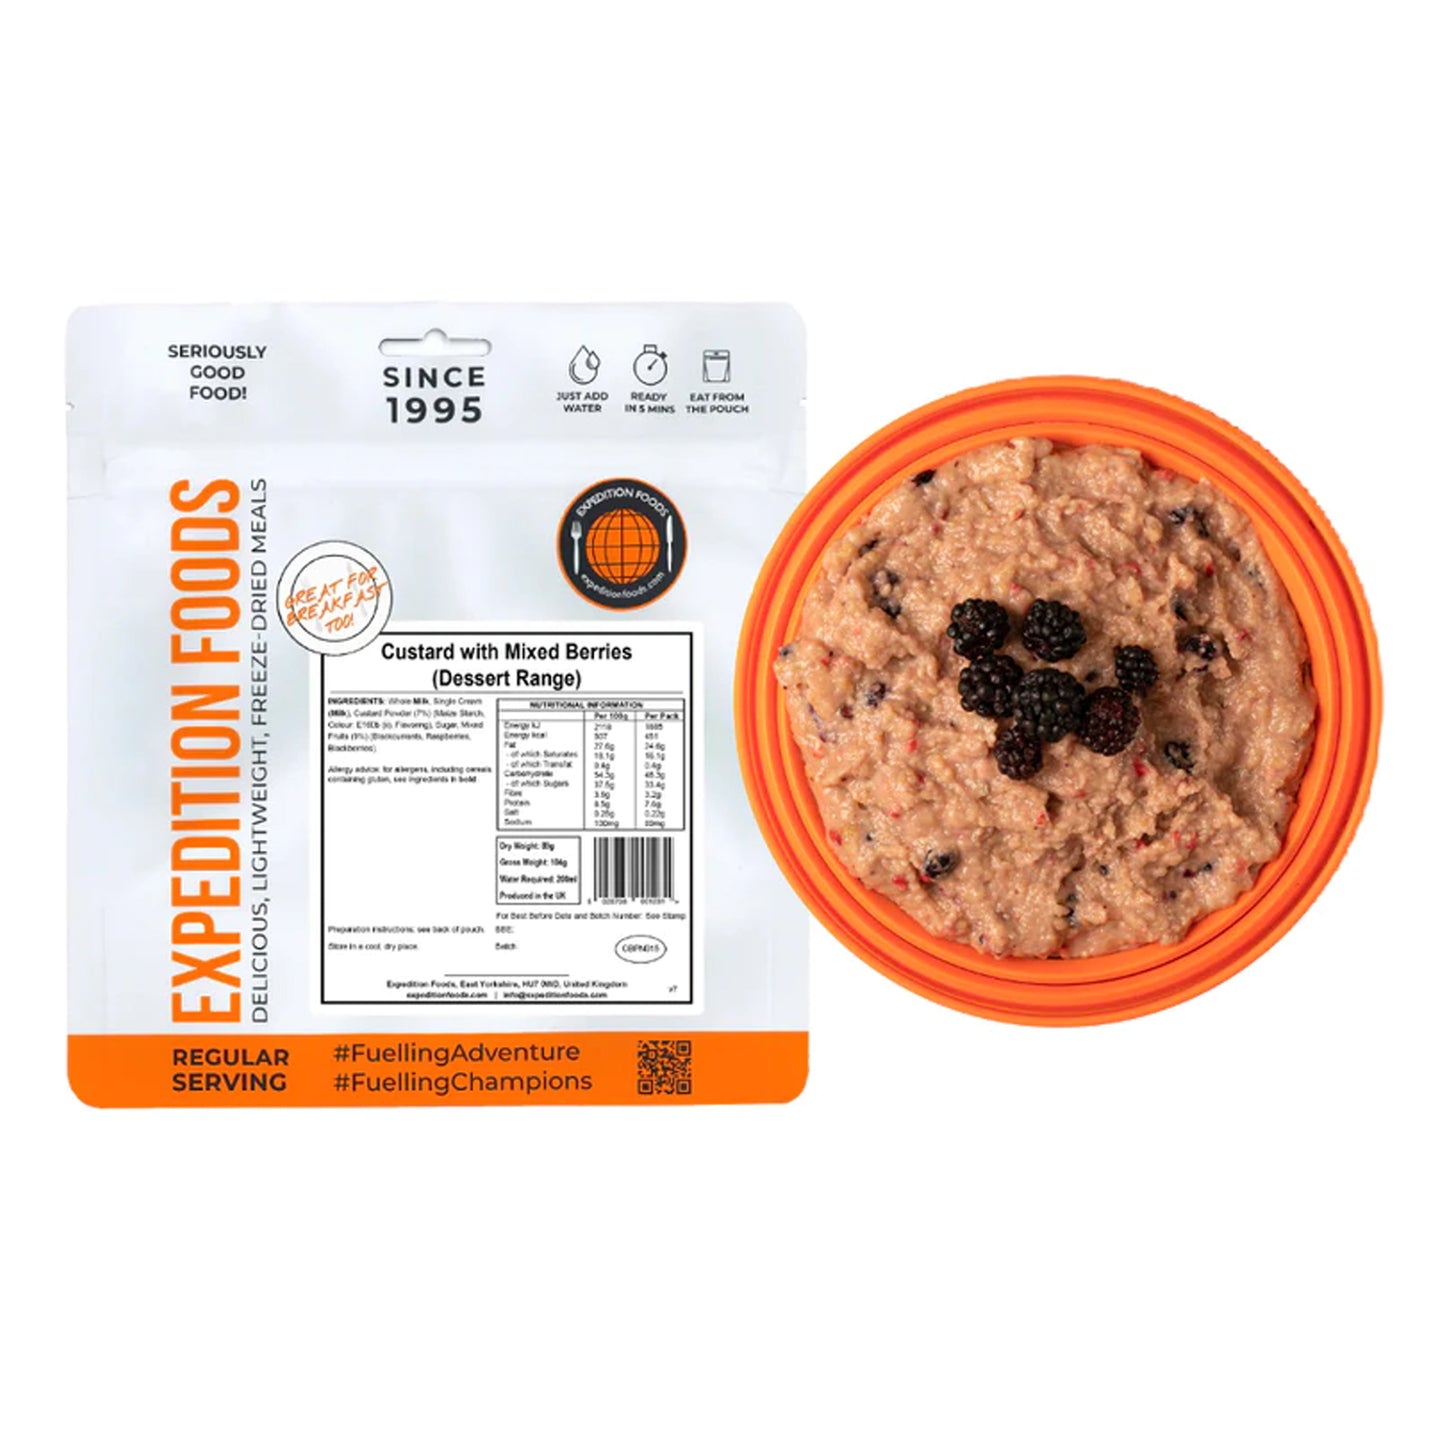 Expedition Foods Custard with Mixed Berries Pudding Meal